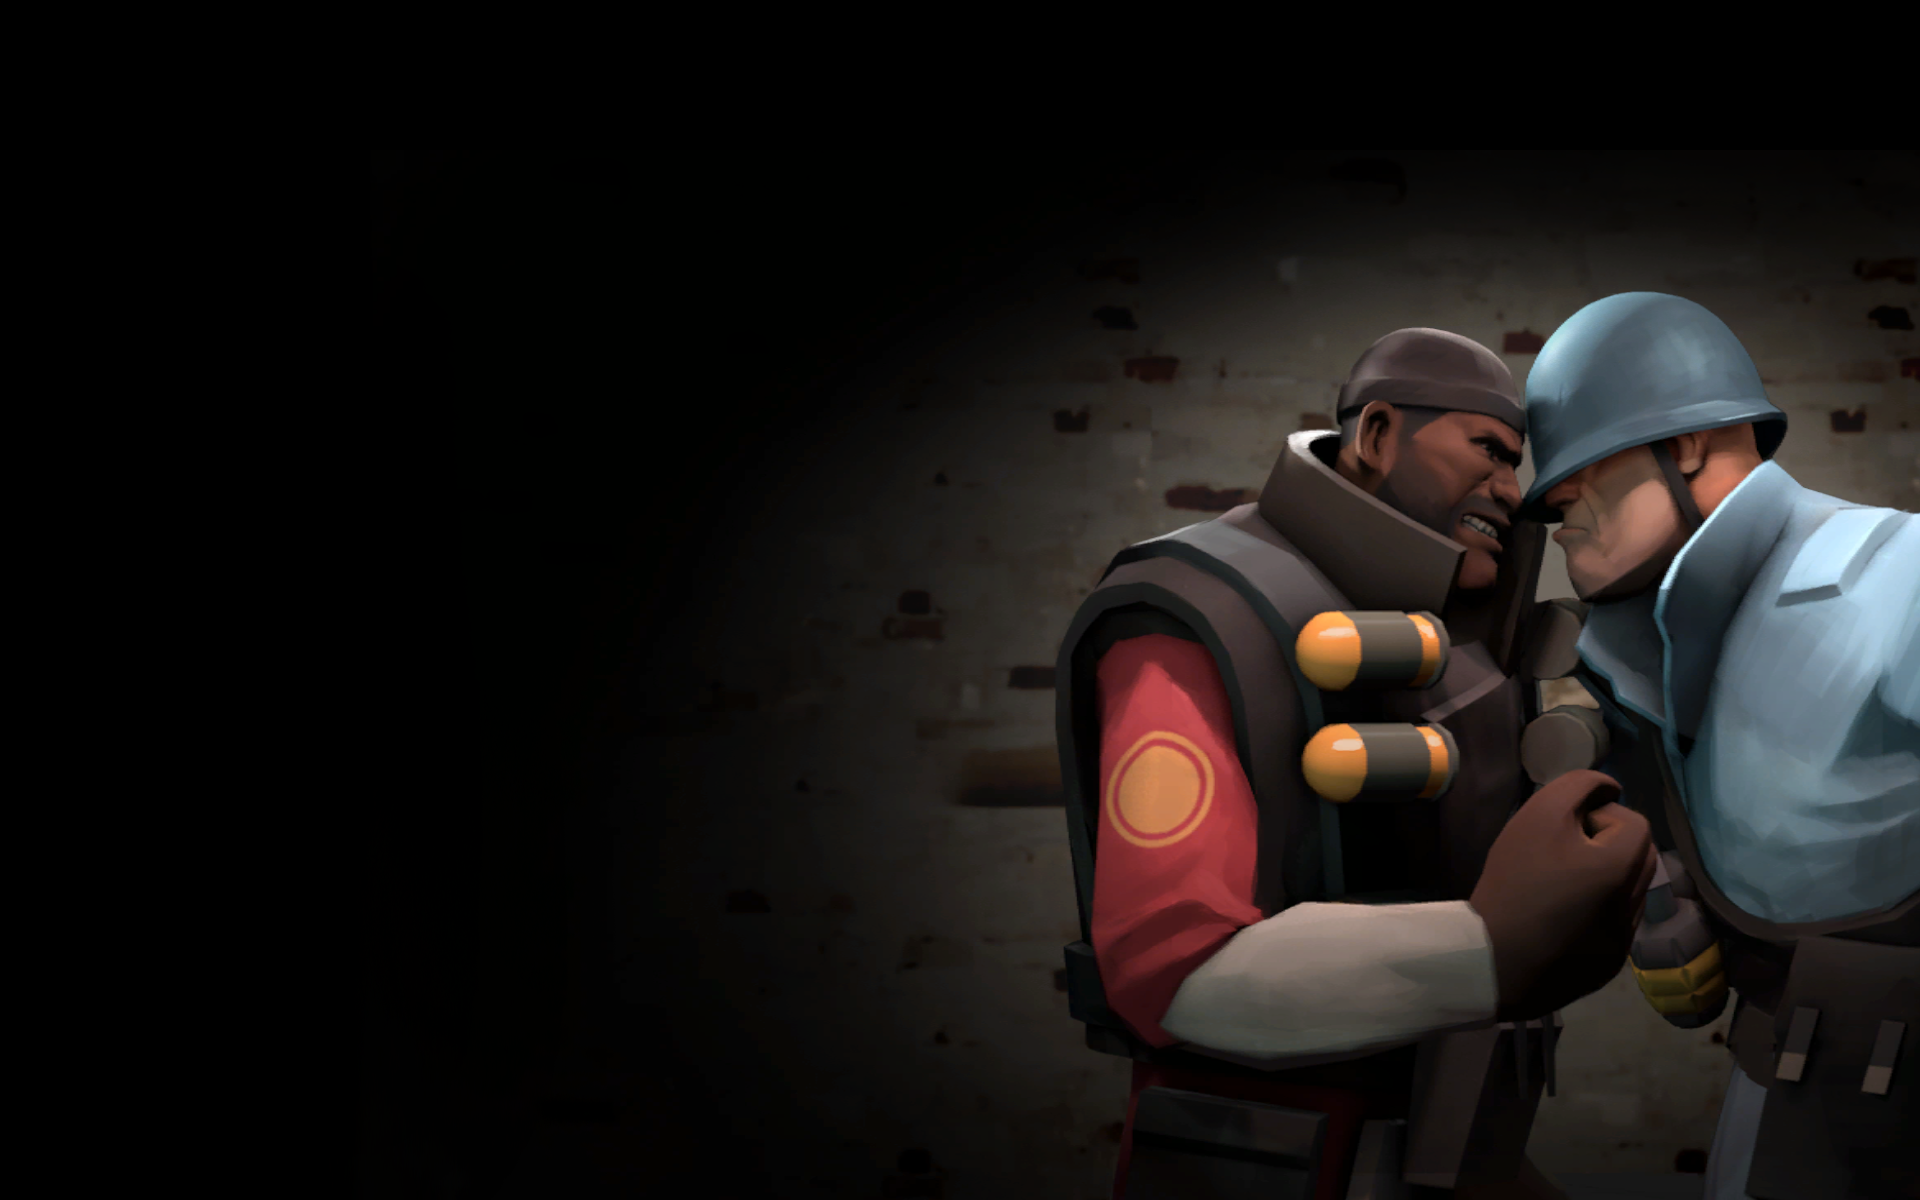 TF2 Wallpapers Games Wallpapers Gallery - PC